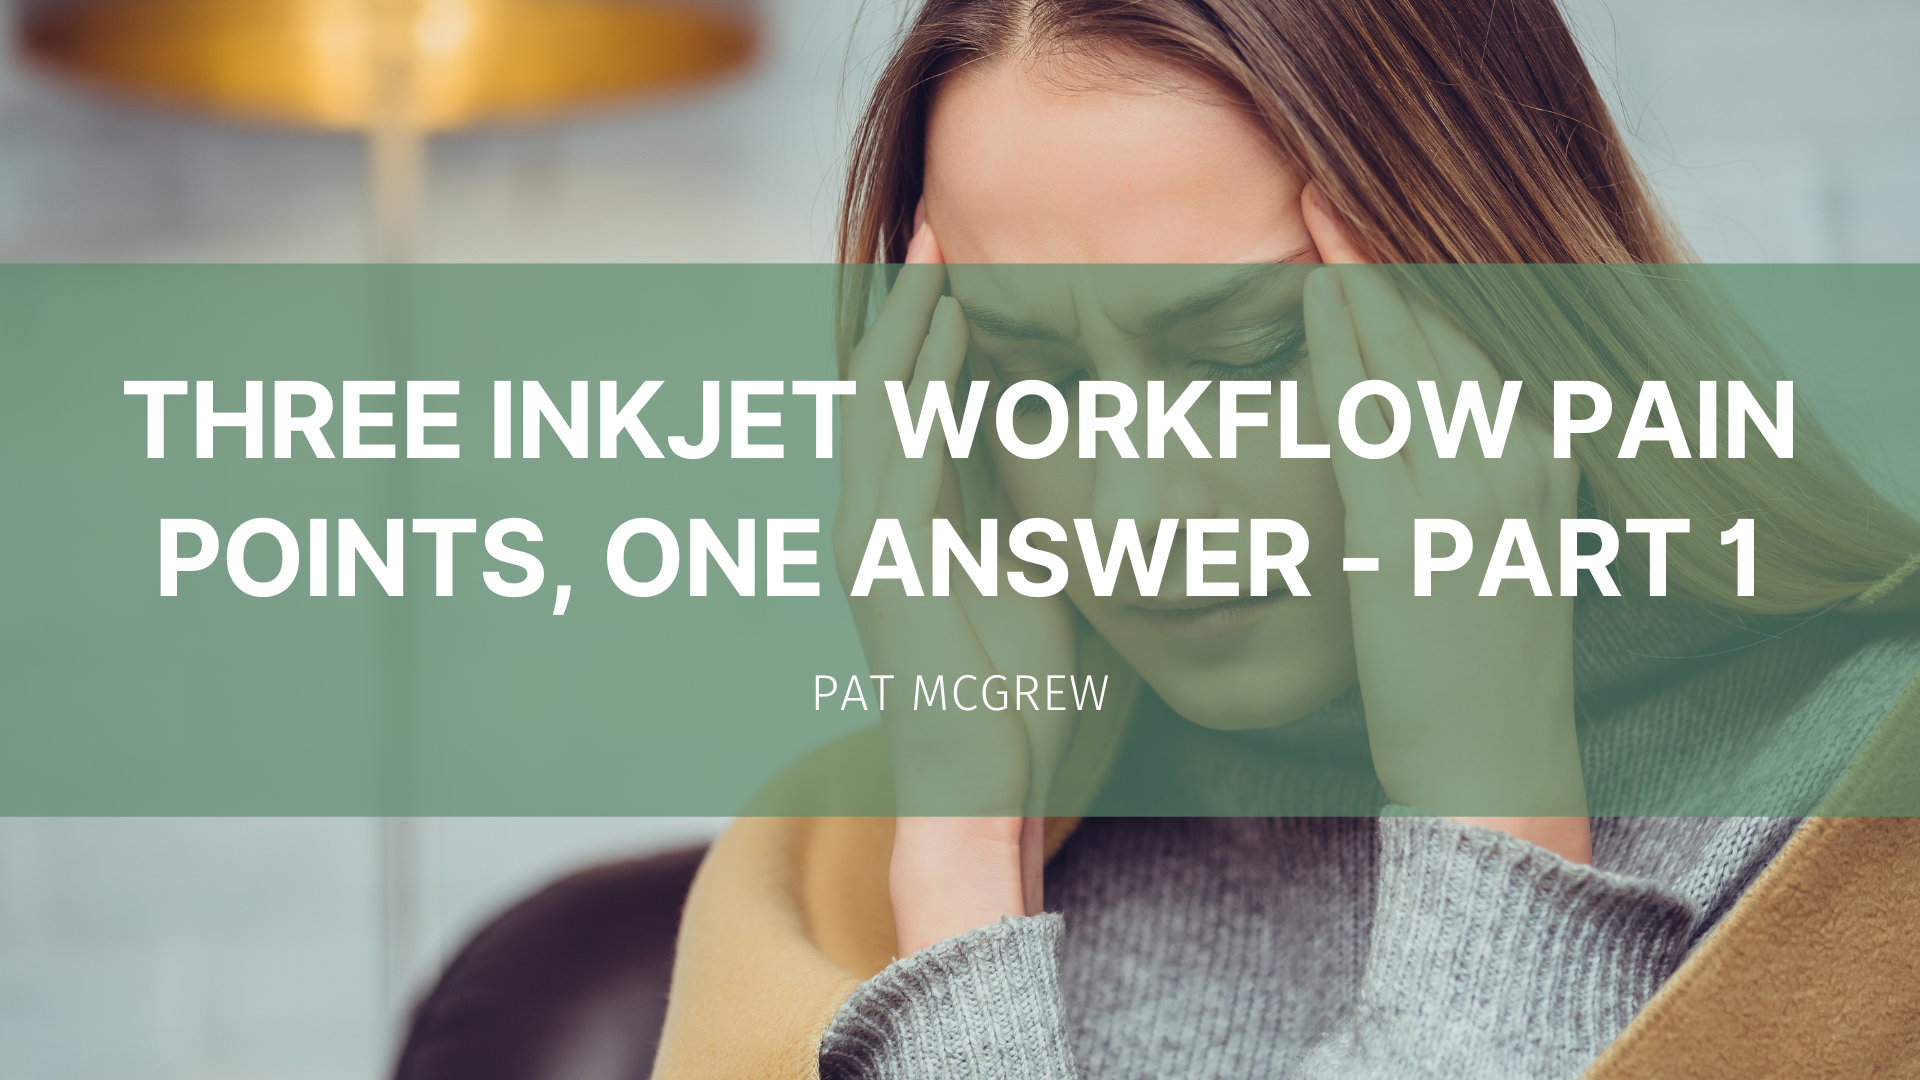 Featured image for “3 Inkjet Workflow Pain Points, 1 Answer – Part 1”